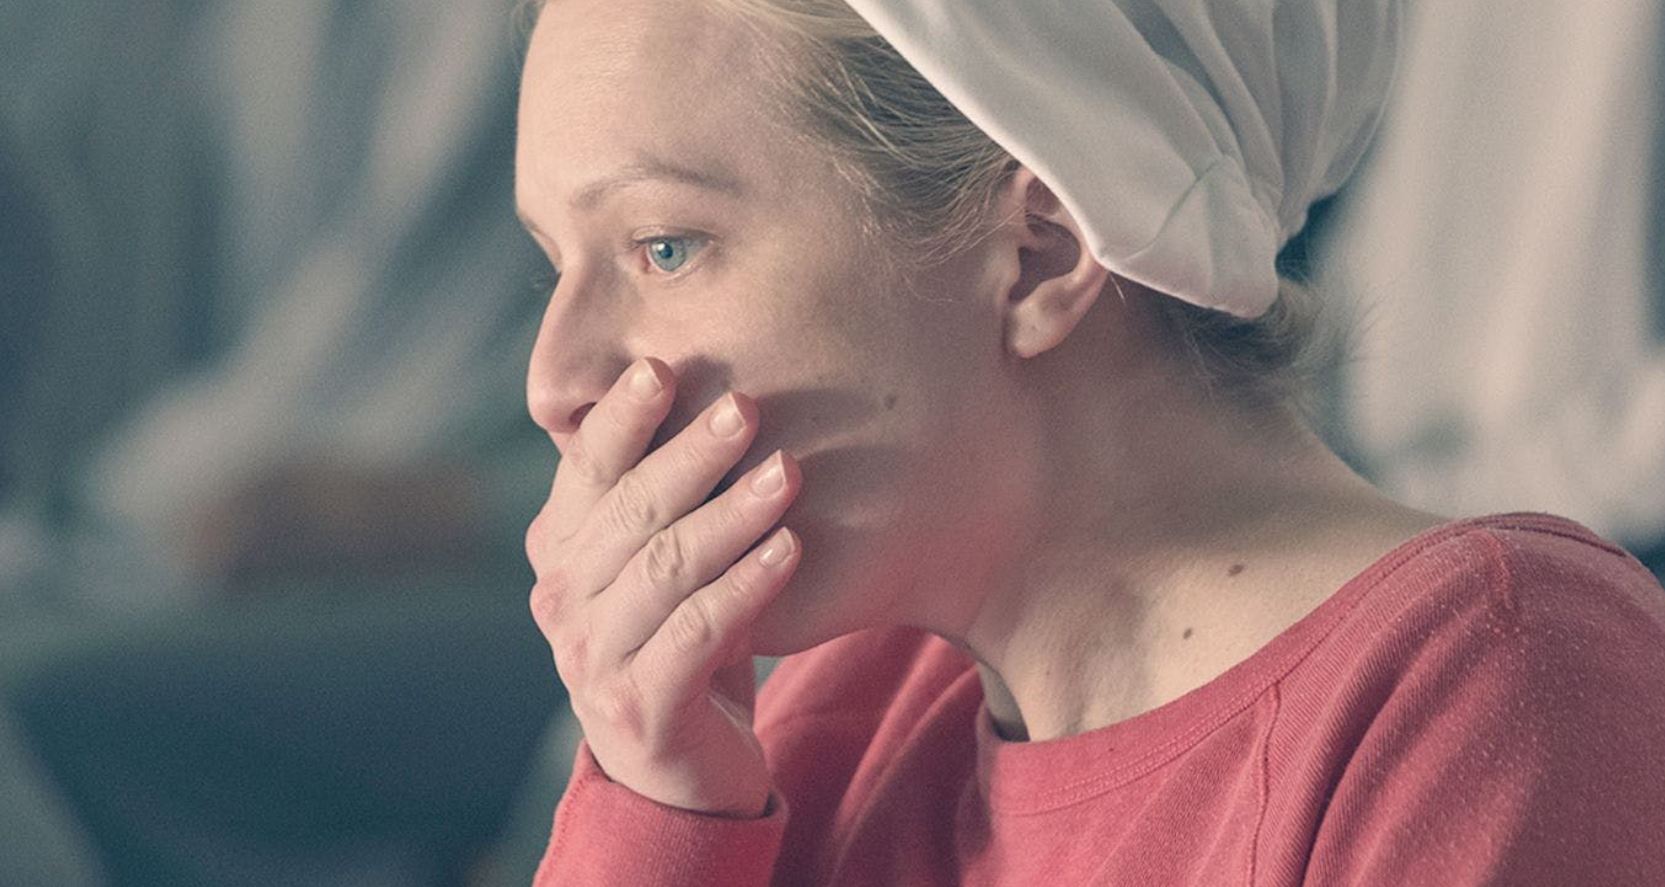 Handmaid&#39;s Tale&#39; To Witness An End? We have the Confirmation and Hints - The  Teal Mango